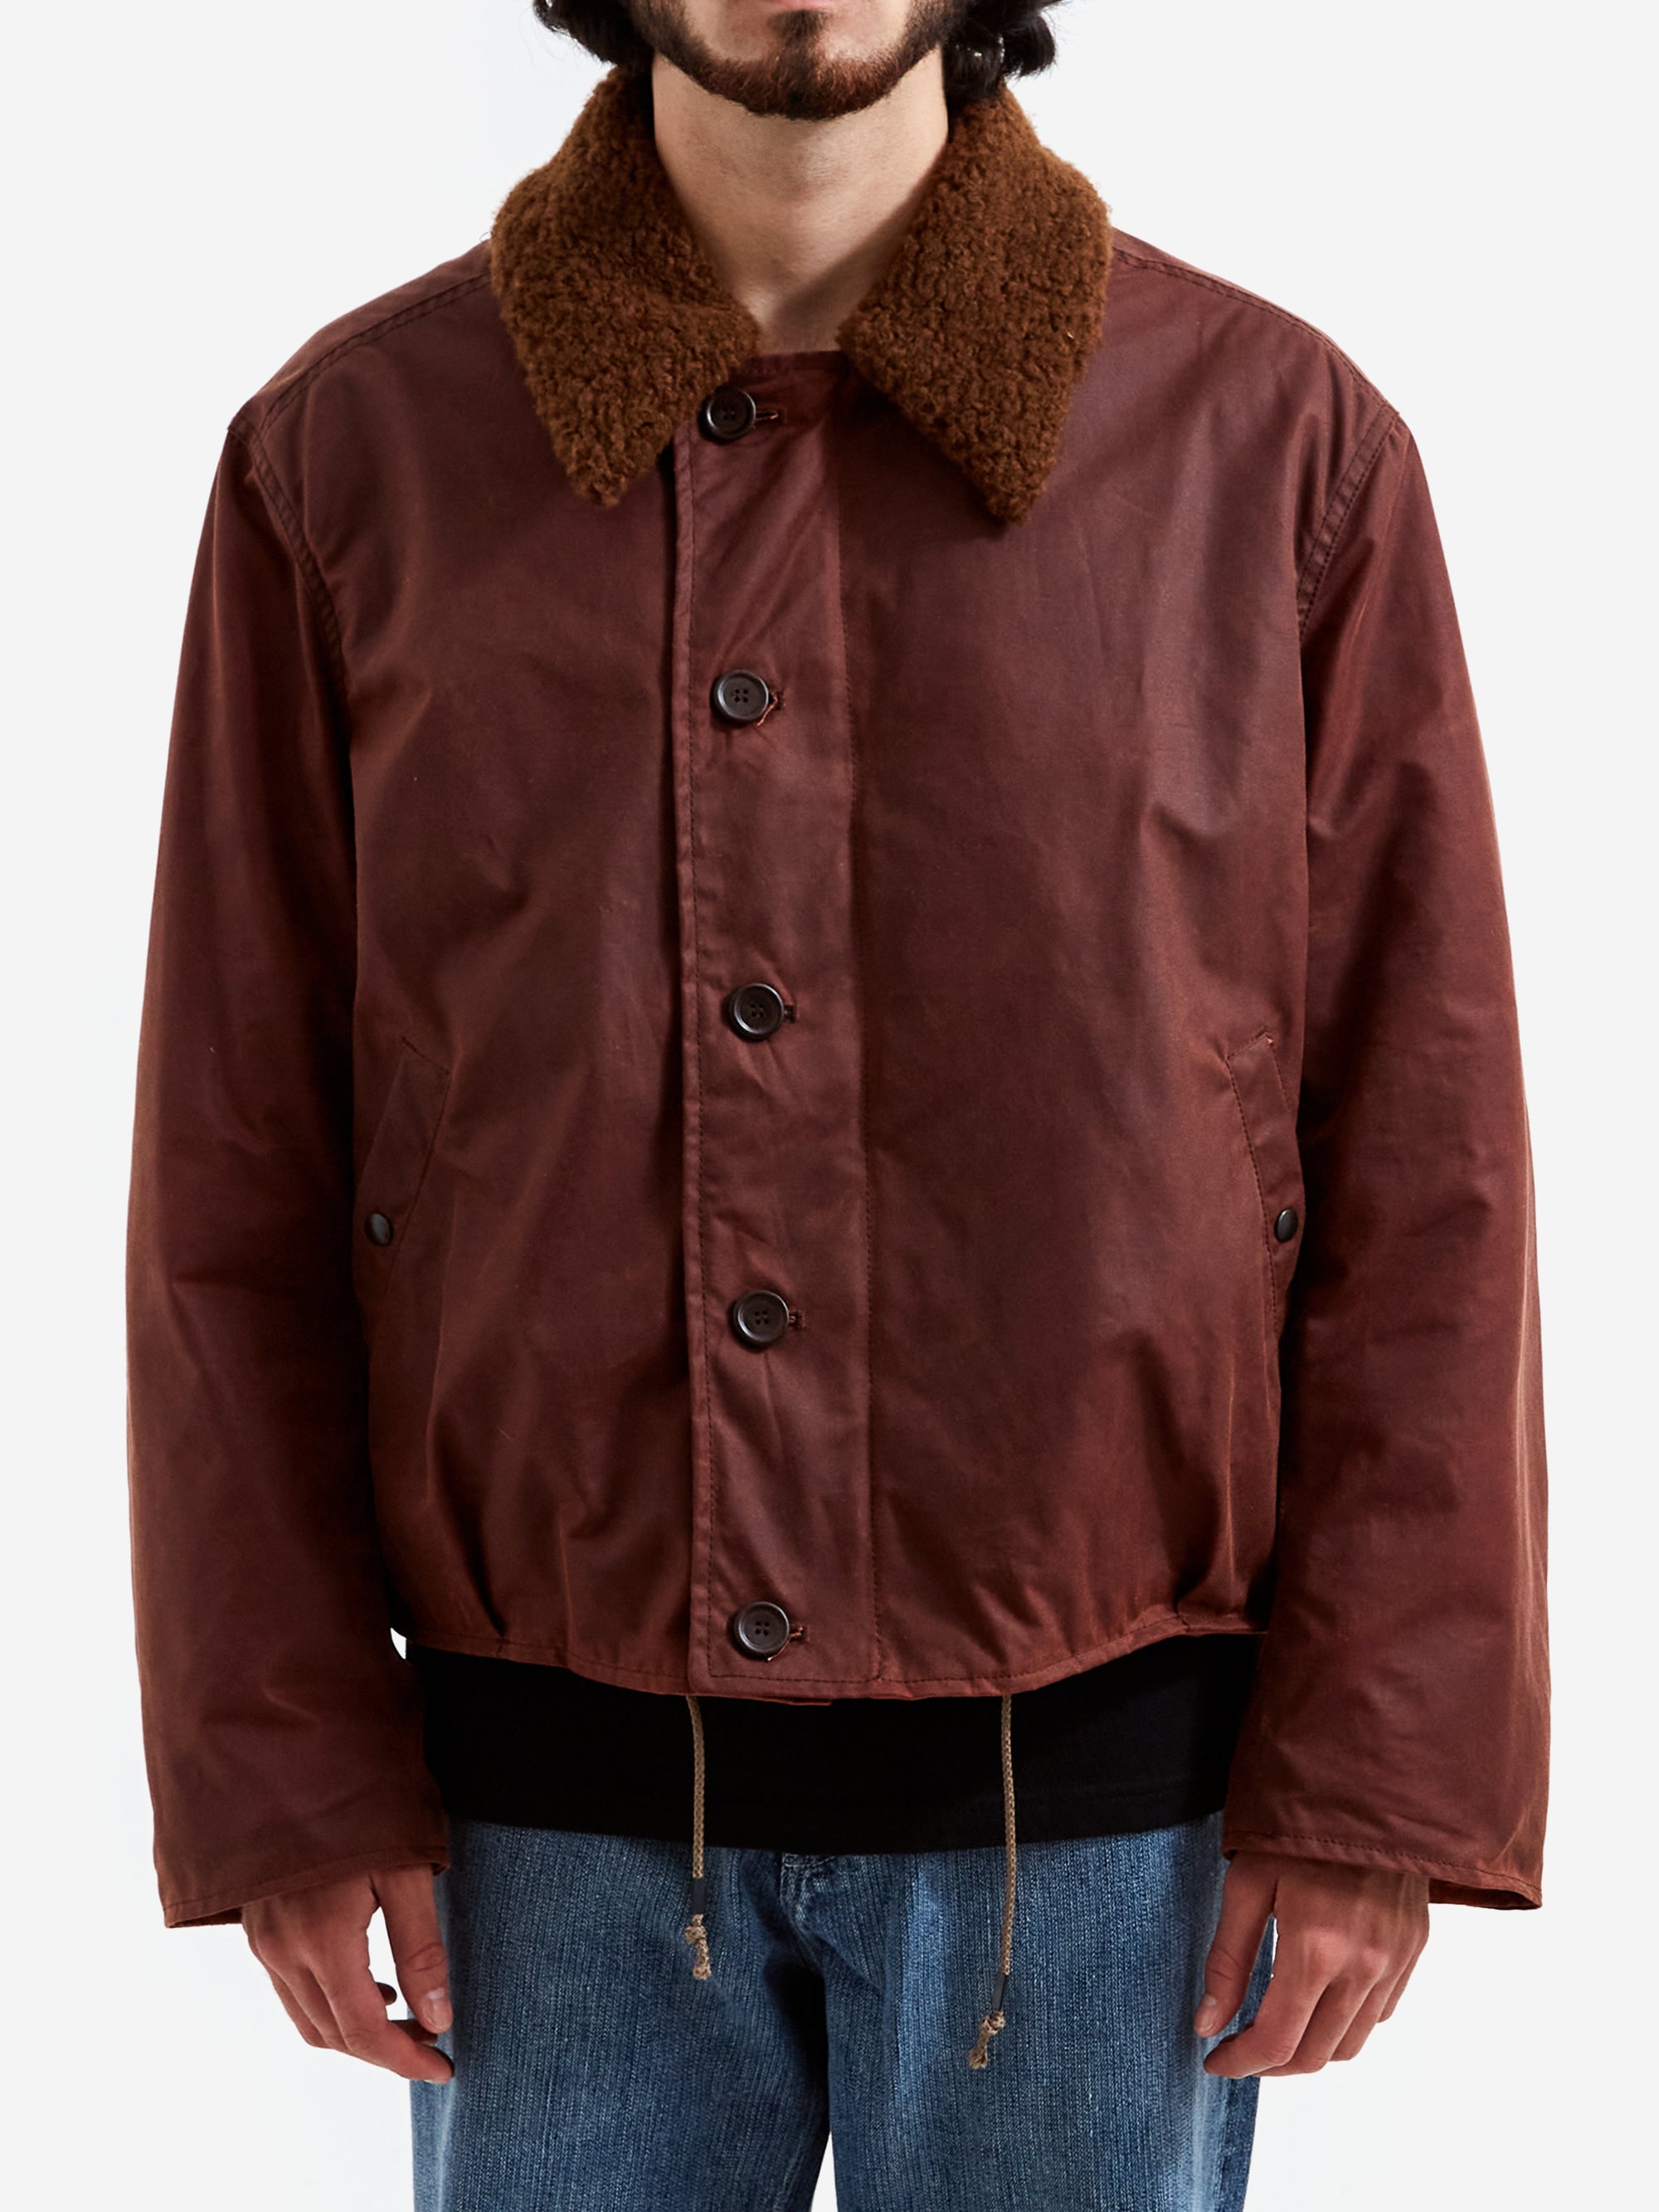 46 OUR LEGACY GRIZZLY JACKET OXBLOOD - ジャケット・アウター